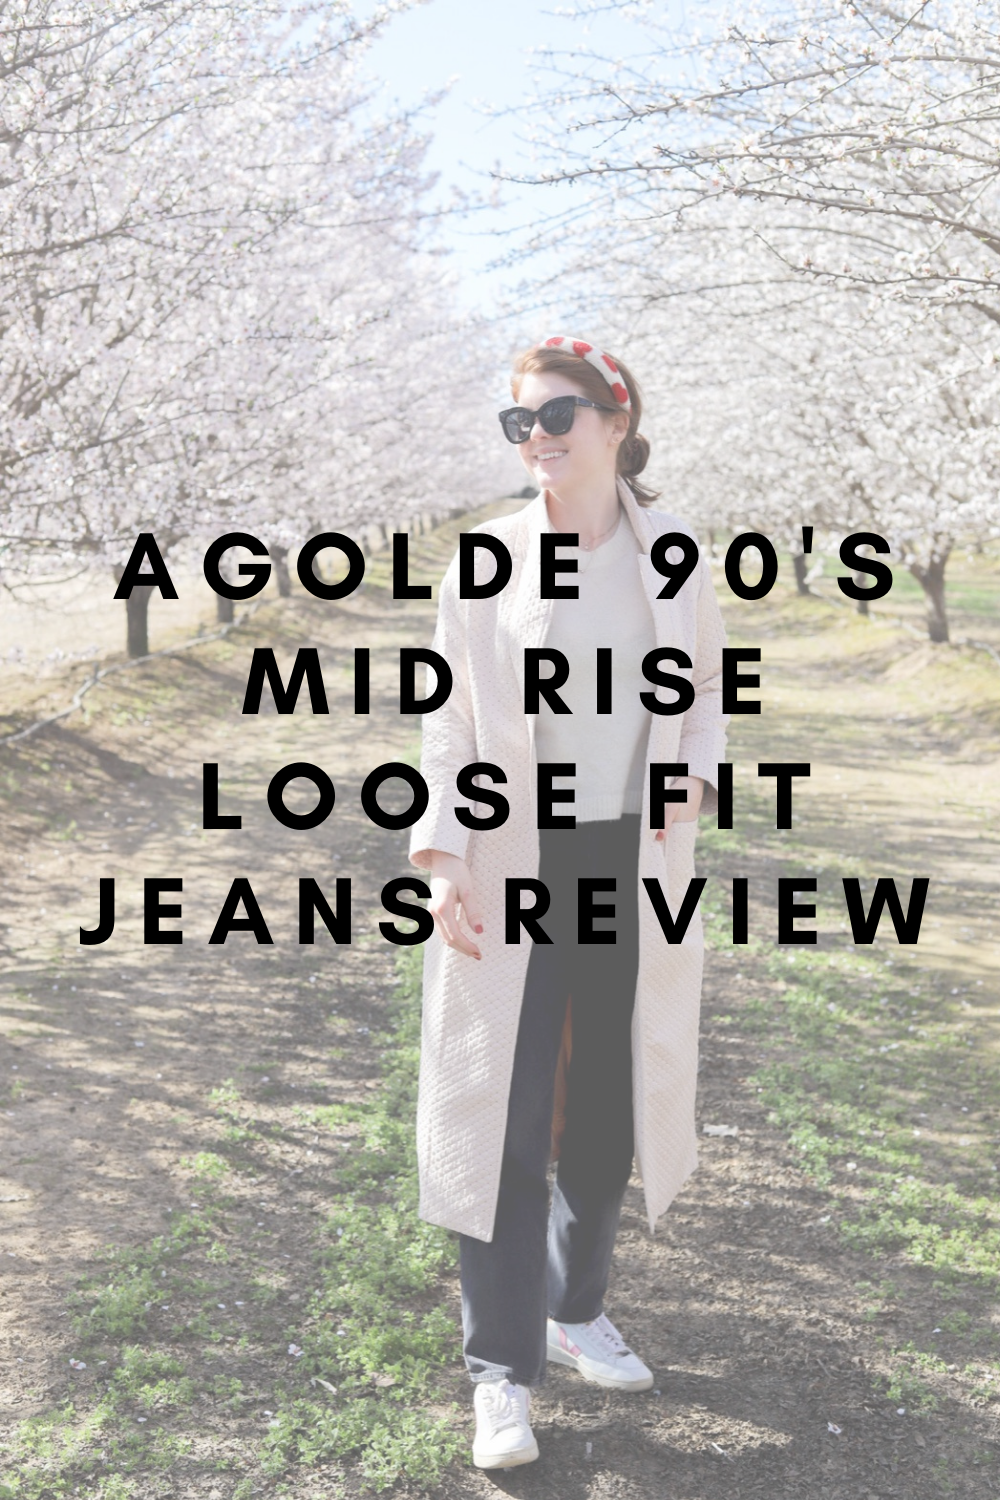 lments of style, agolde 90's mid rise loose fit jeans review, how they fit, sizing, compared to pinch waist, are they worth the money, la blogger